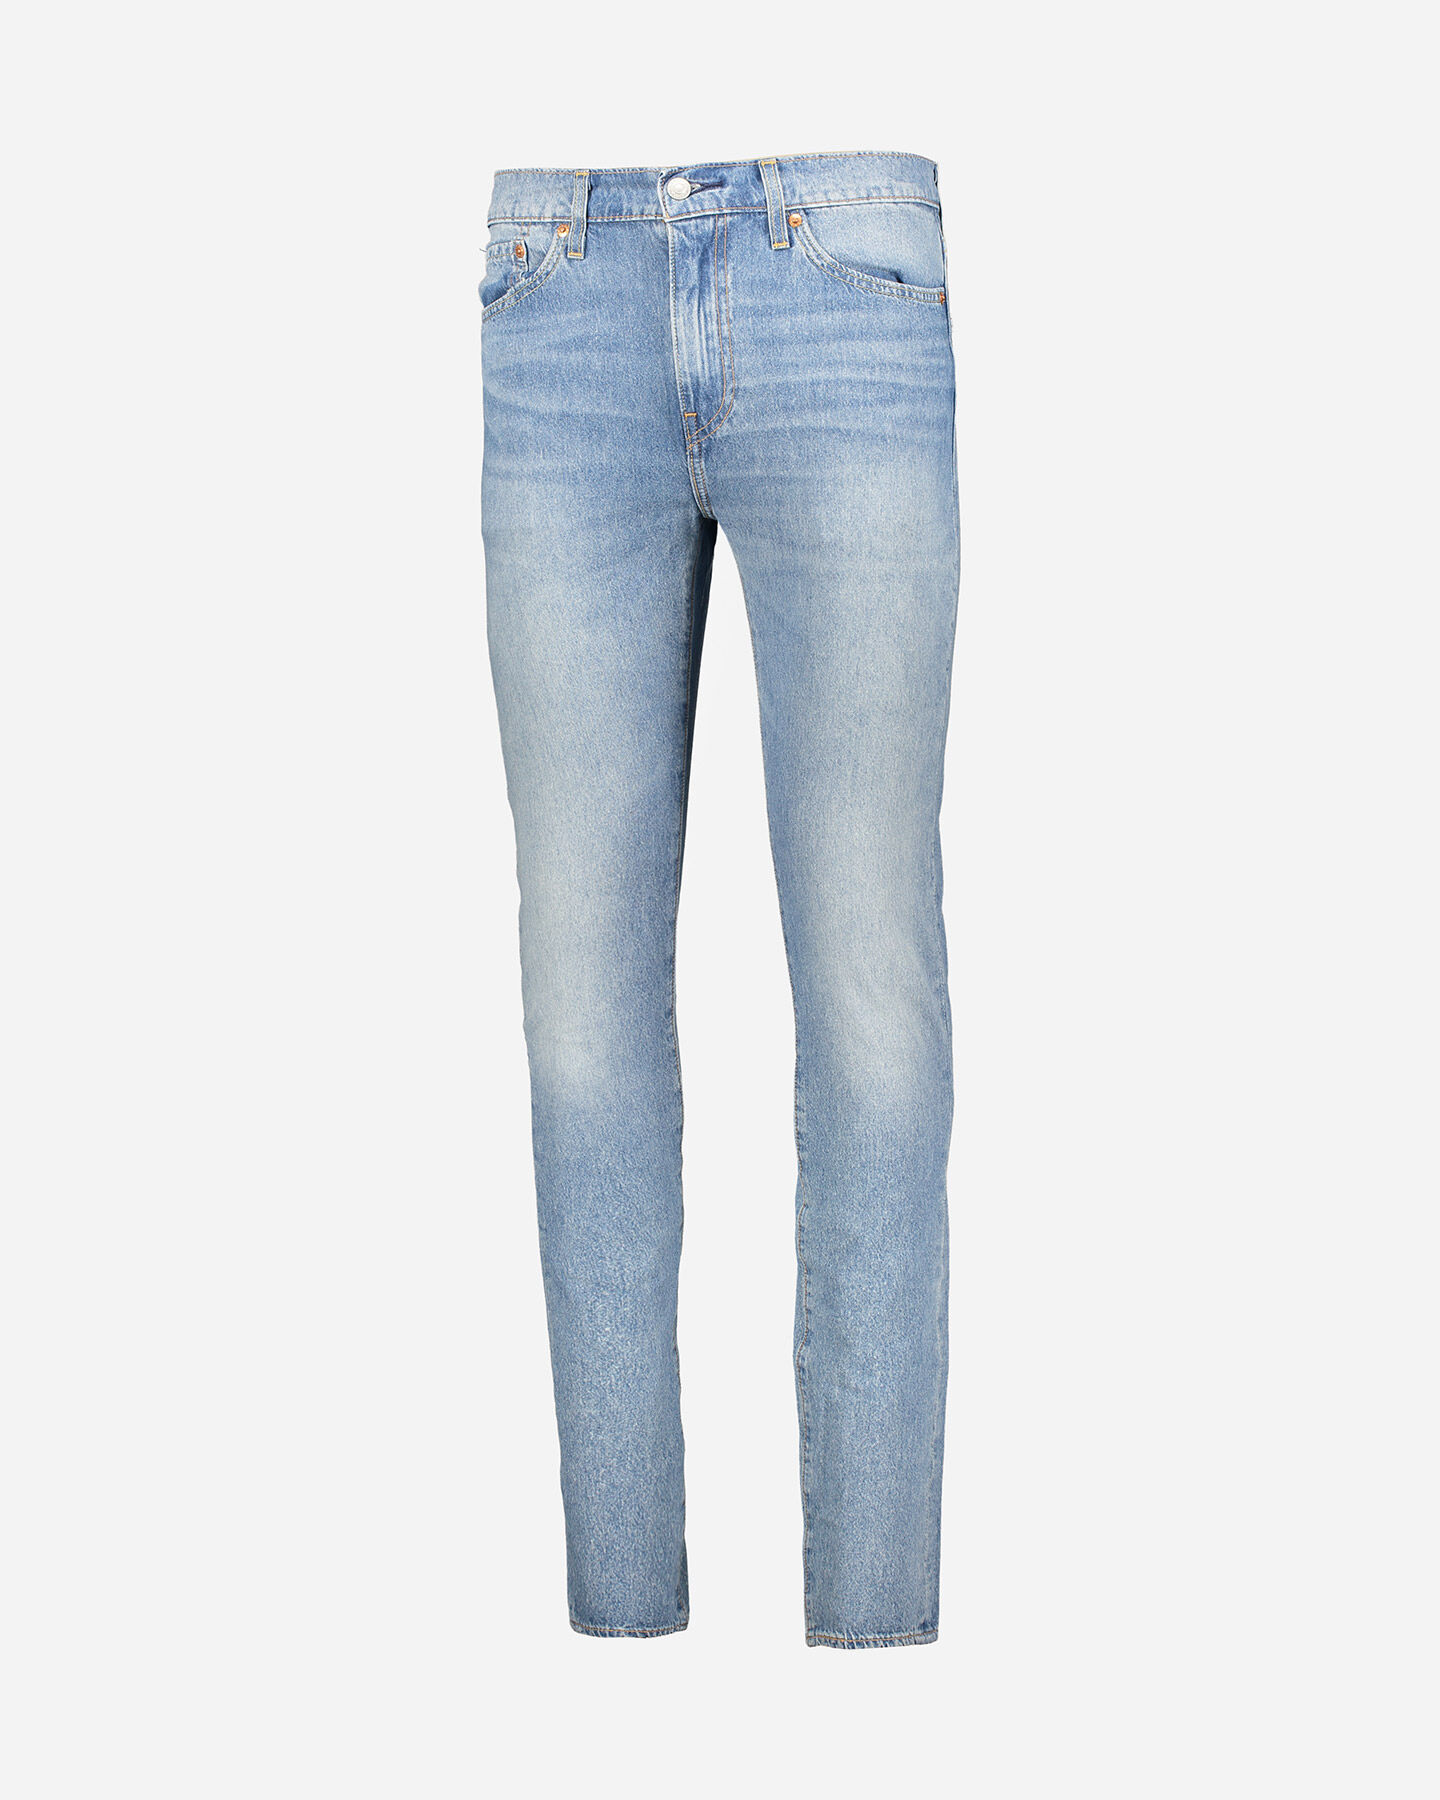  Jeans LEVI'S 510 SKINNY M S4076911|1051|30 scatto 4